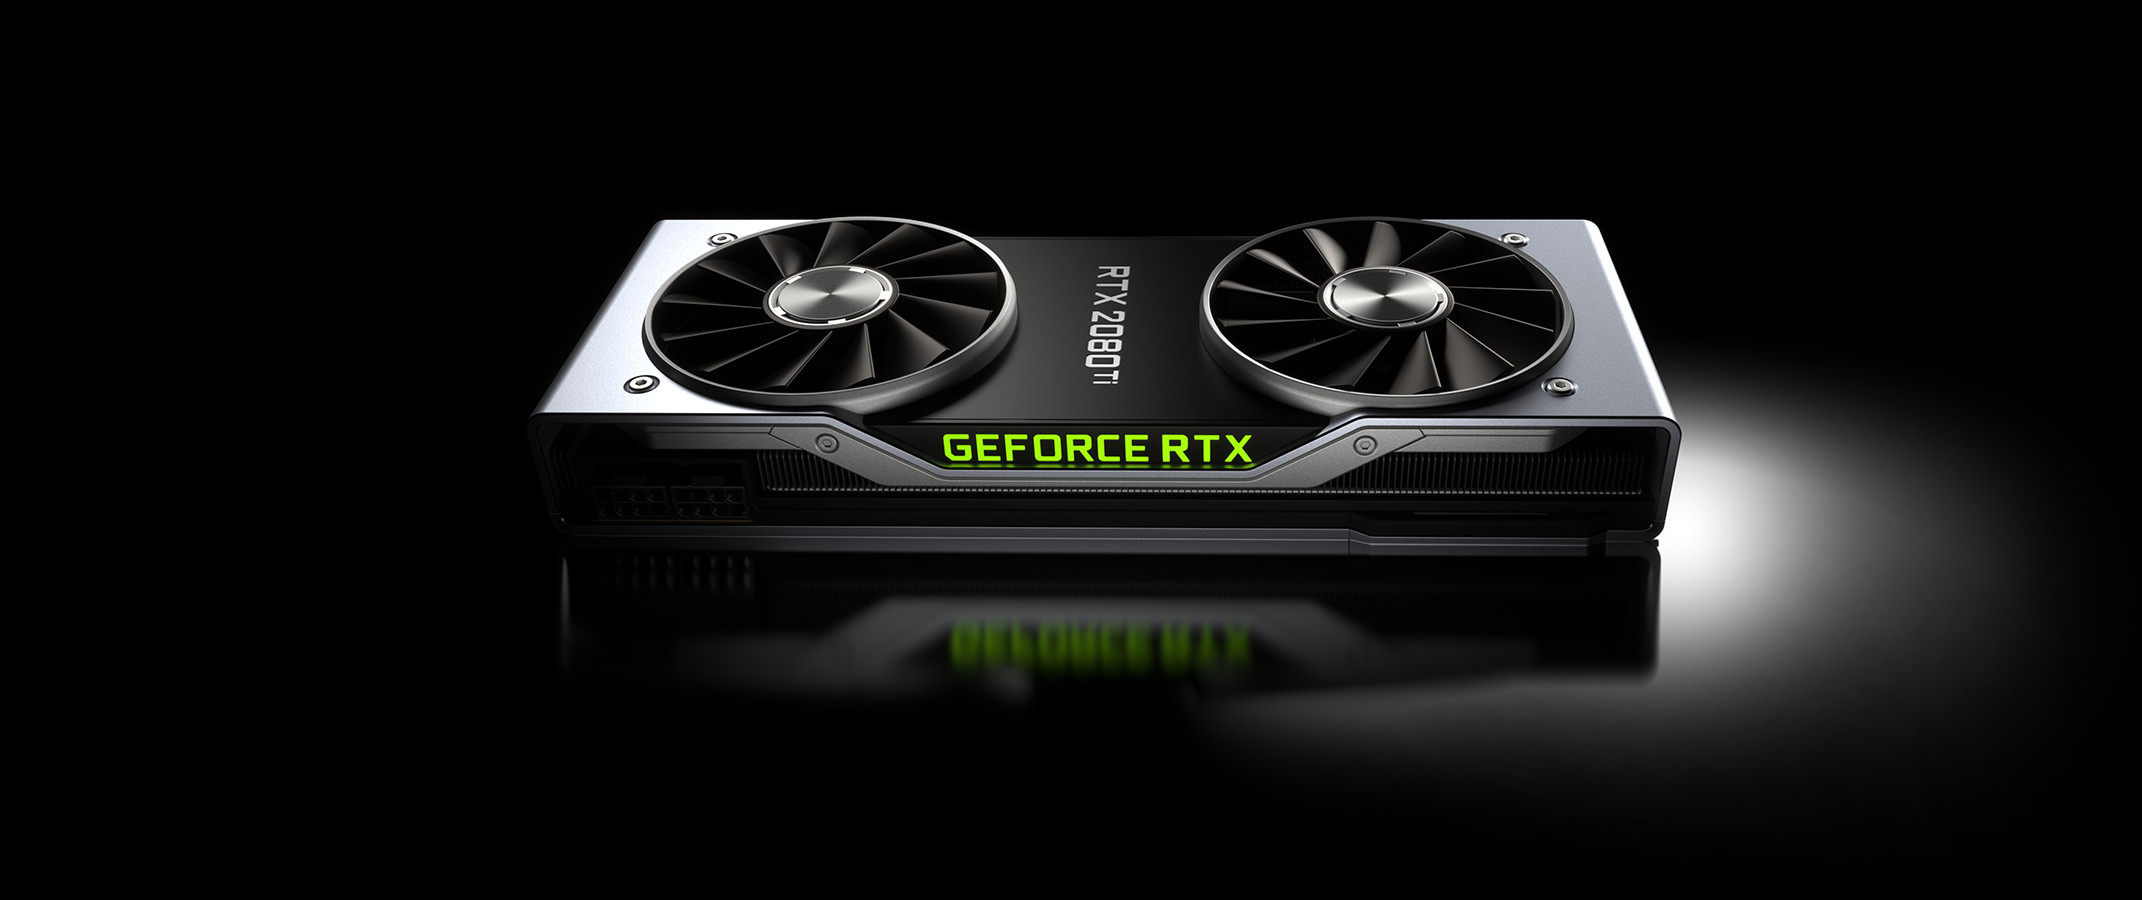 NVIDIA GeForce Ampere Series will start as early as August: GeForce RTX 3080 Ti could be in user's hands before the PlayStation 5 and Xbox X - NotebookCheck.net News